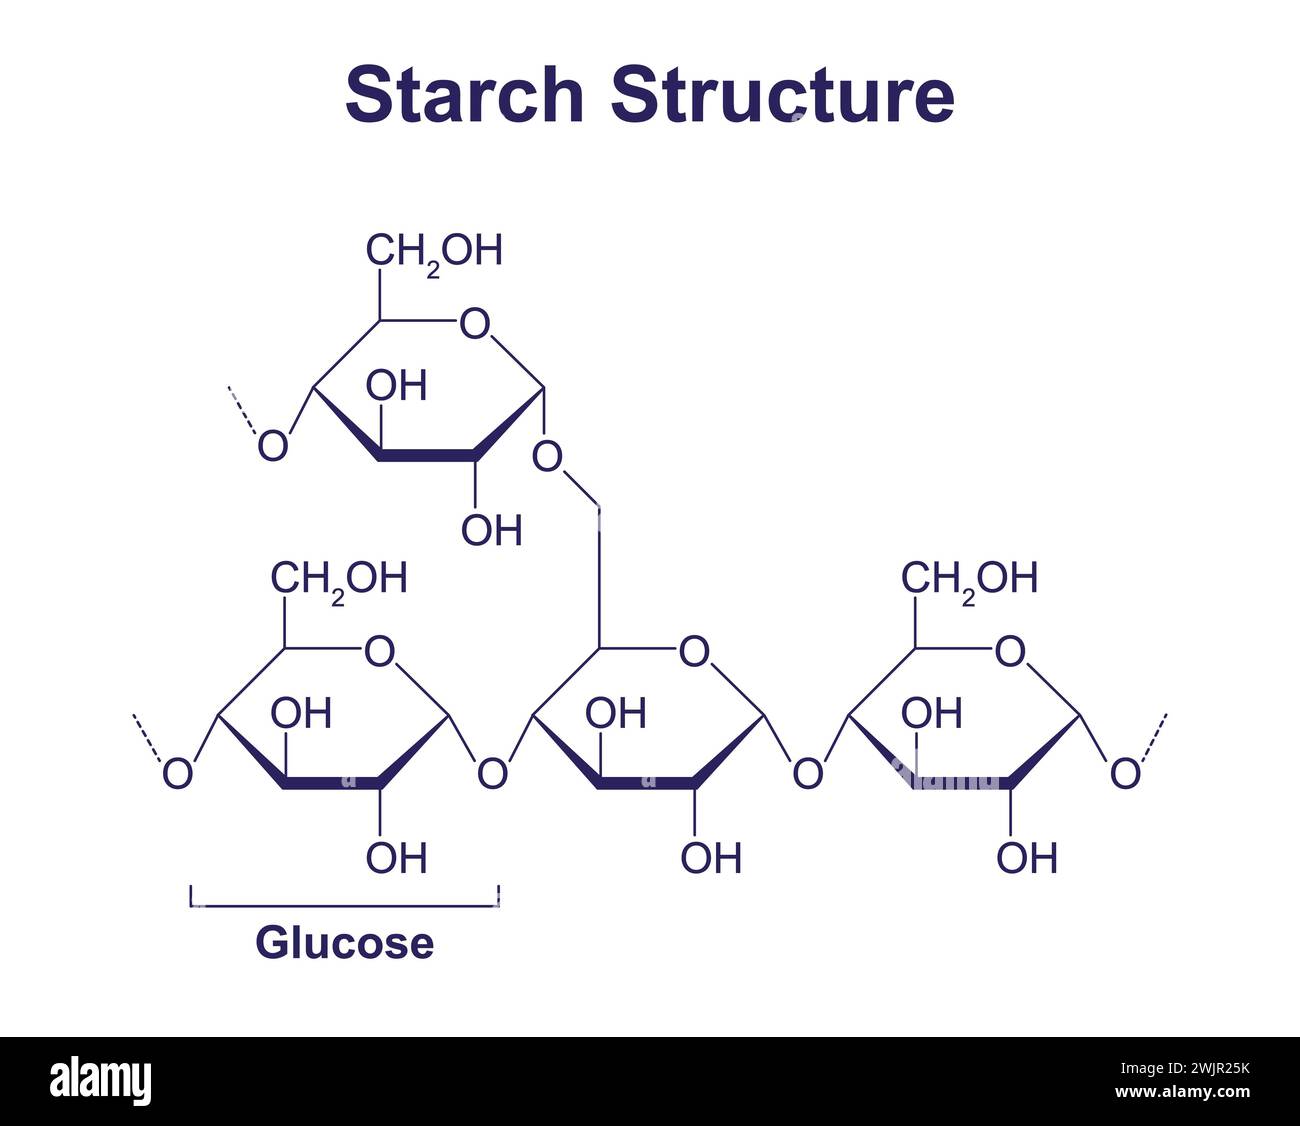 Starch structure, illustration Stock Photo